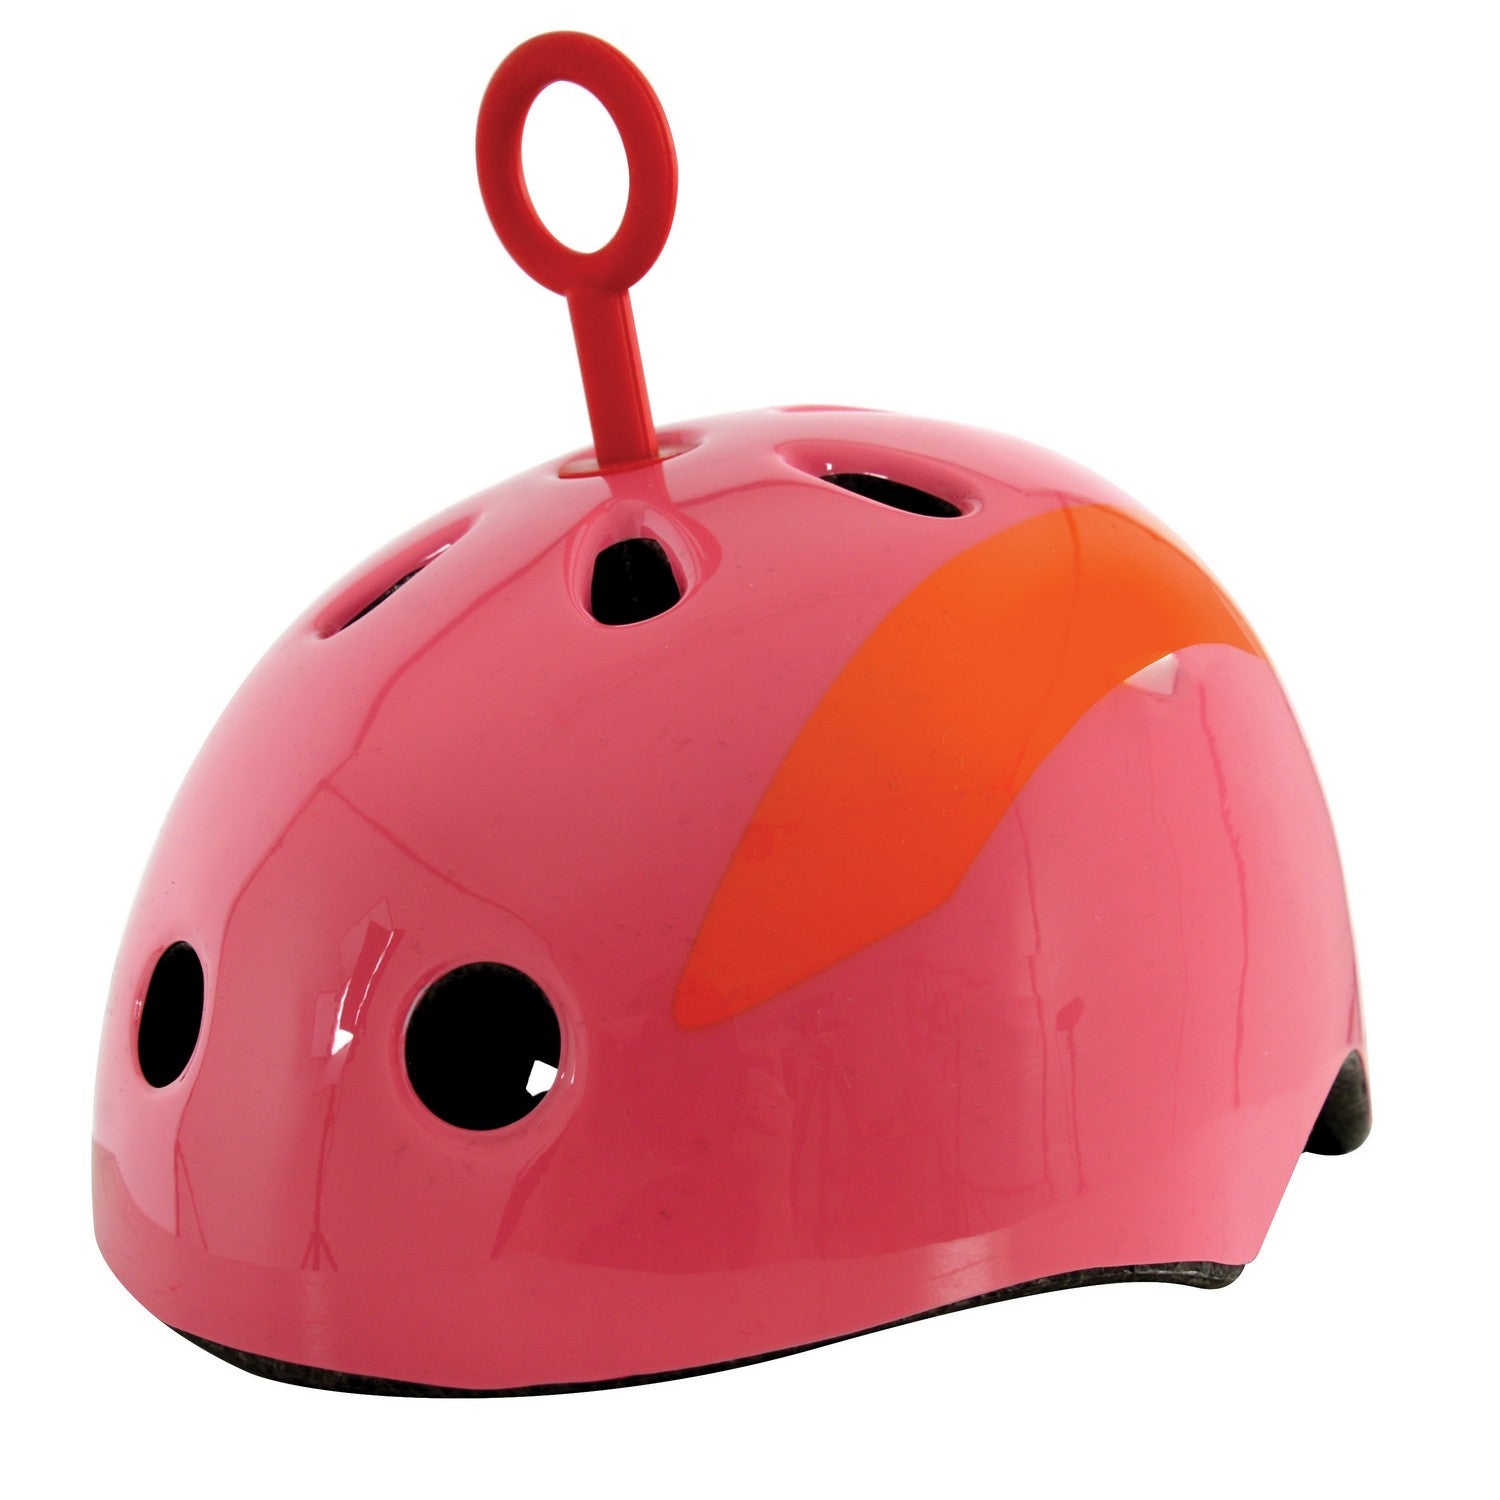 Teletubbies Po Ramp Style Bicycle Skate Scooter Safety Helmet